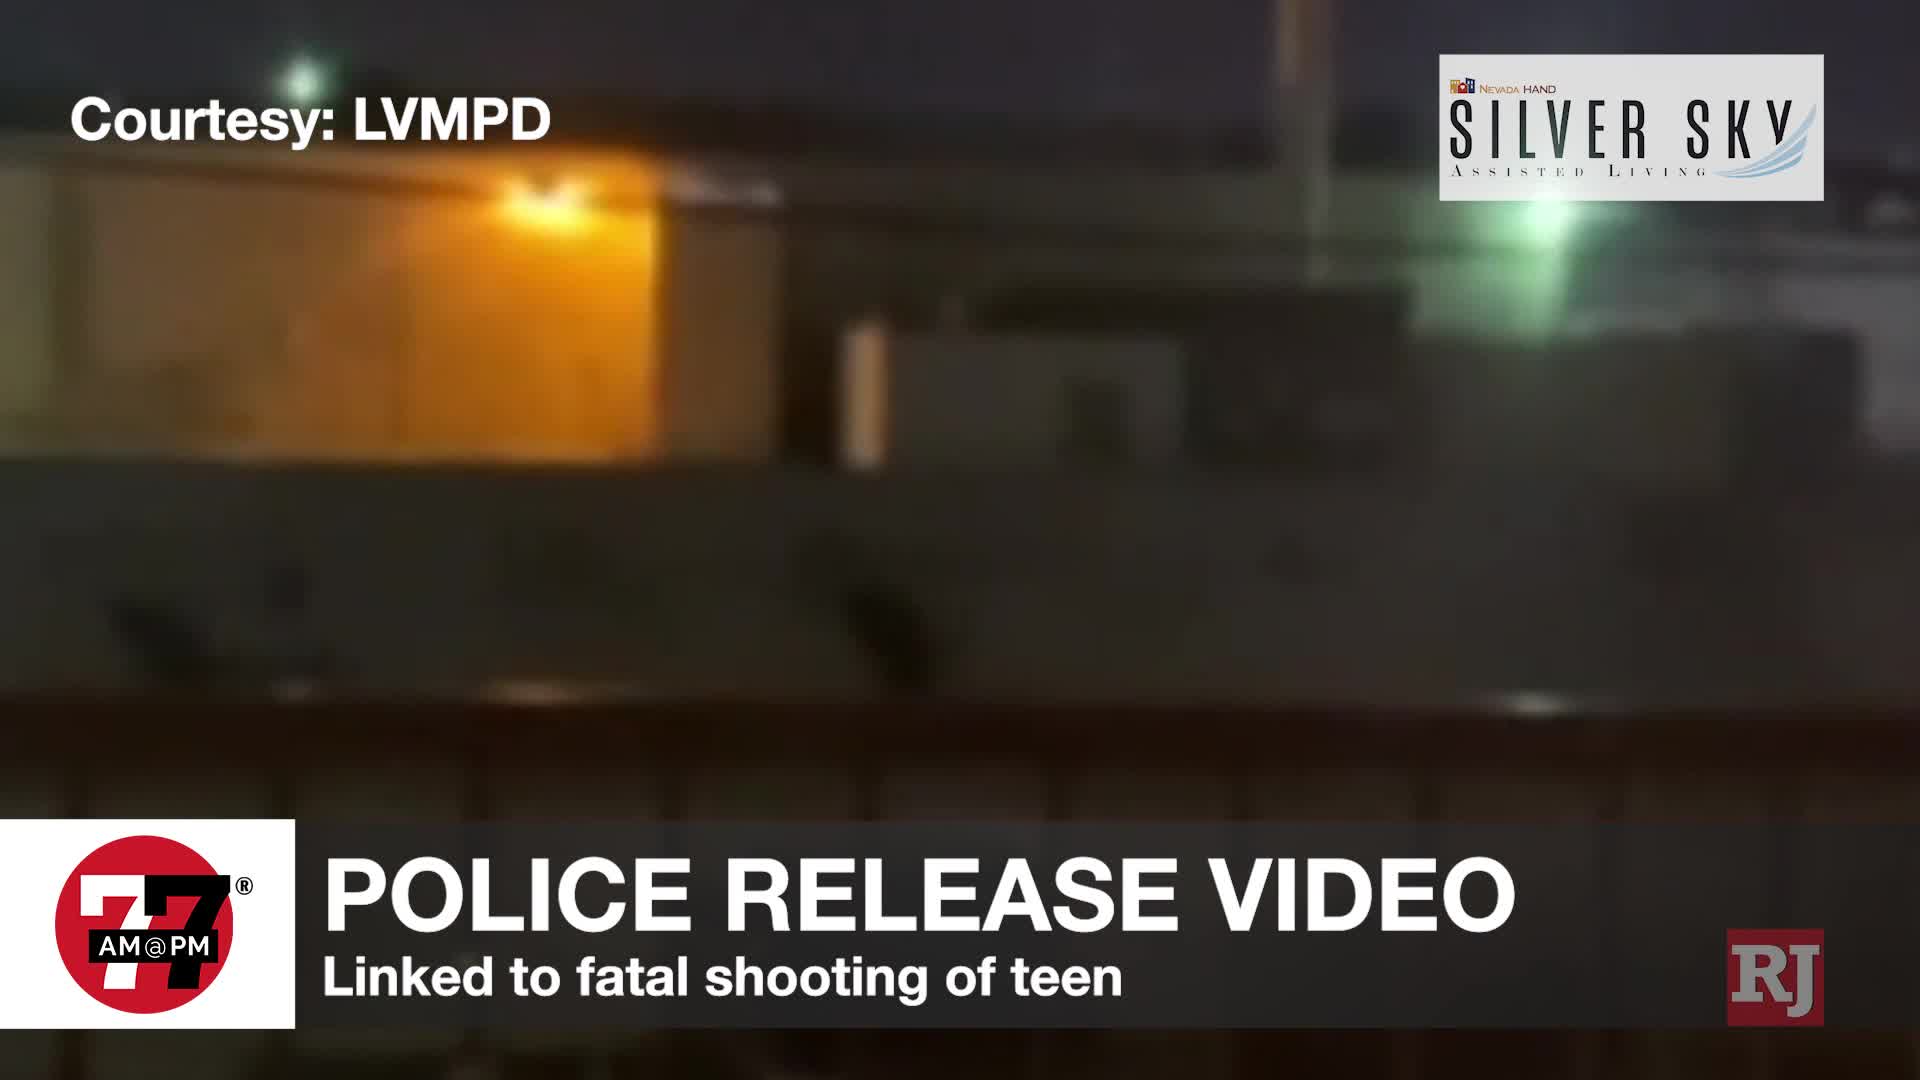 Police release video linked to fatal shooting